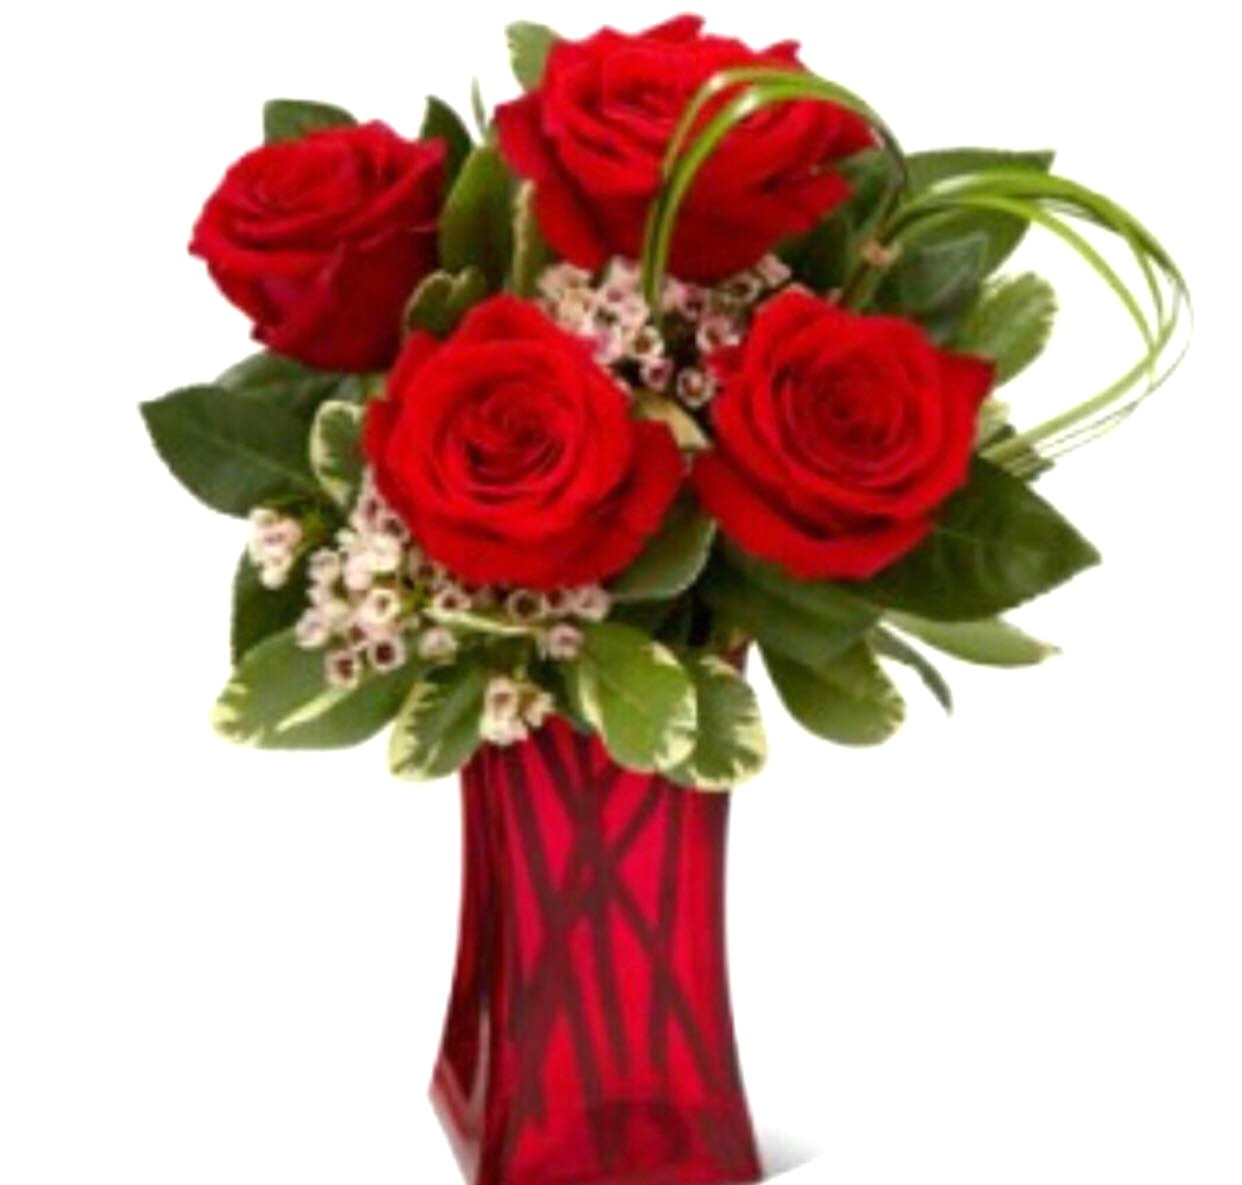 24 Stylish Red Flowers In Vase 2024 free download red flowers in vase of flower image rose inspirational 6 roses in a vaseh vases s vase throughout download image